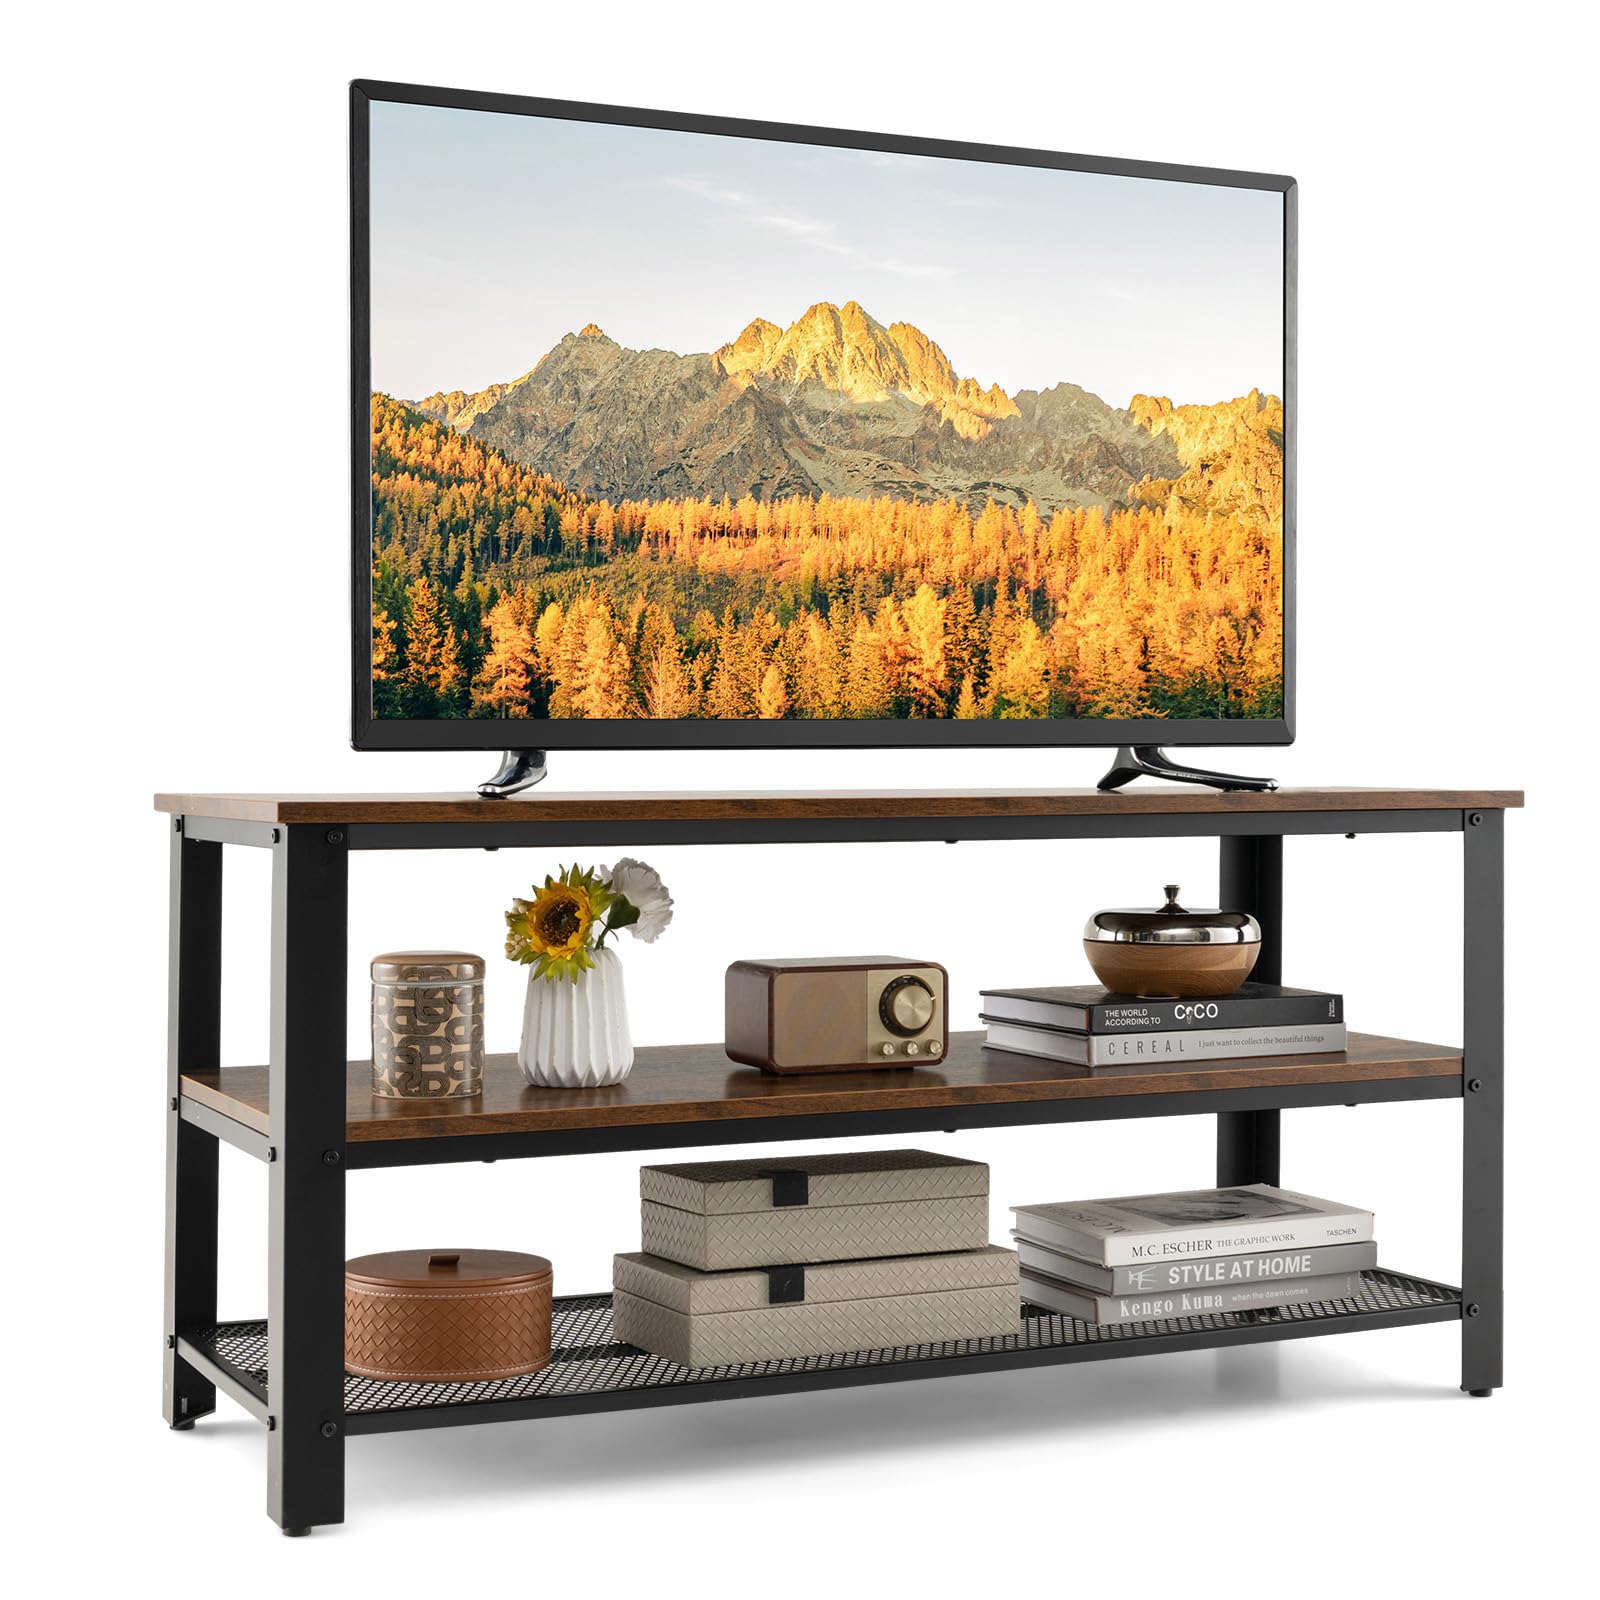 Giantex TV Stand for Bedroom and Living Room - 3-Tier Industrial Entertainment Center with Open Storage Shelves